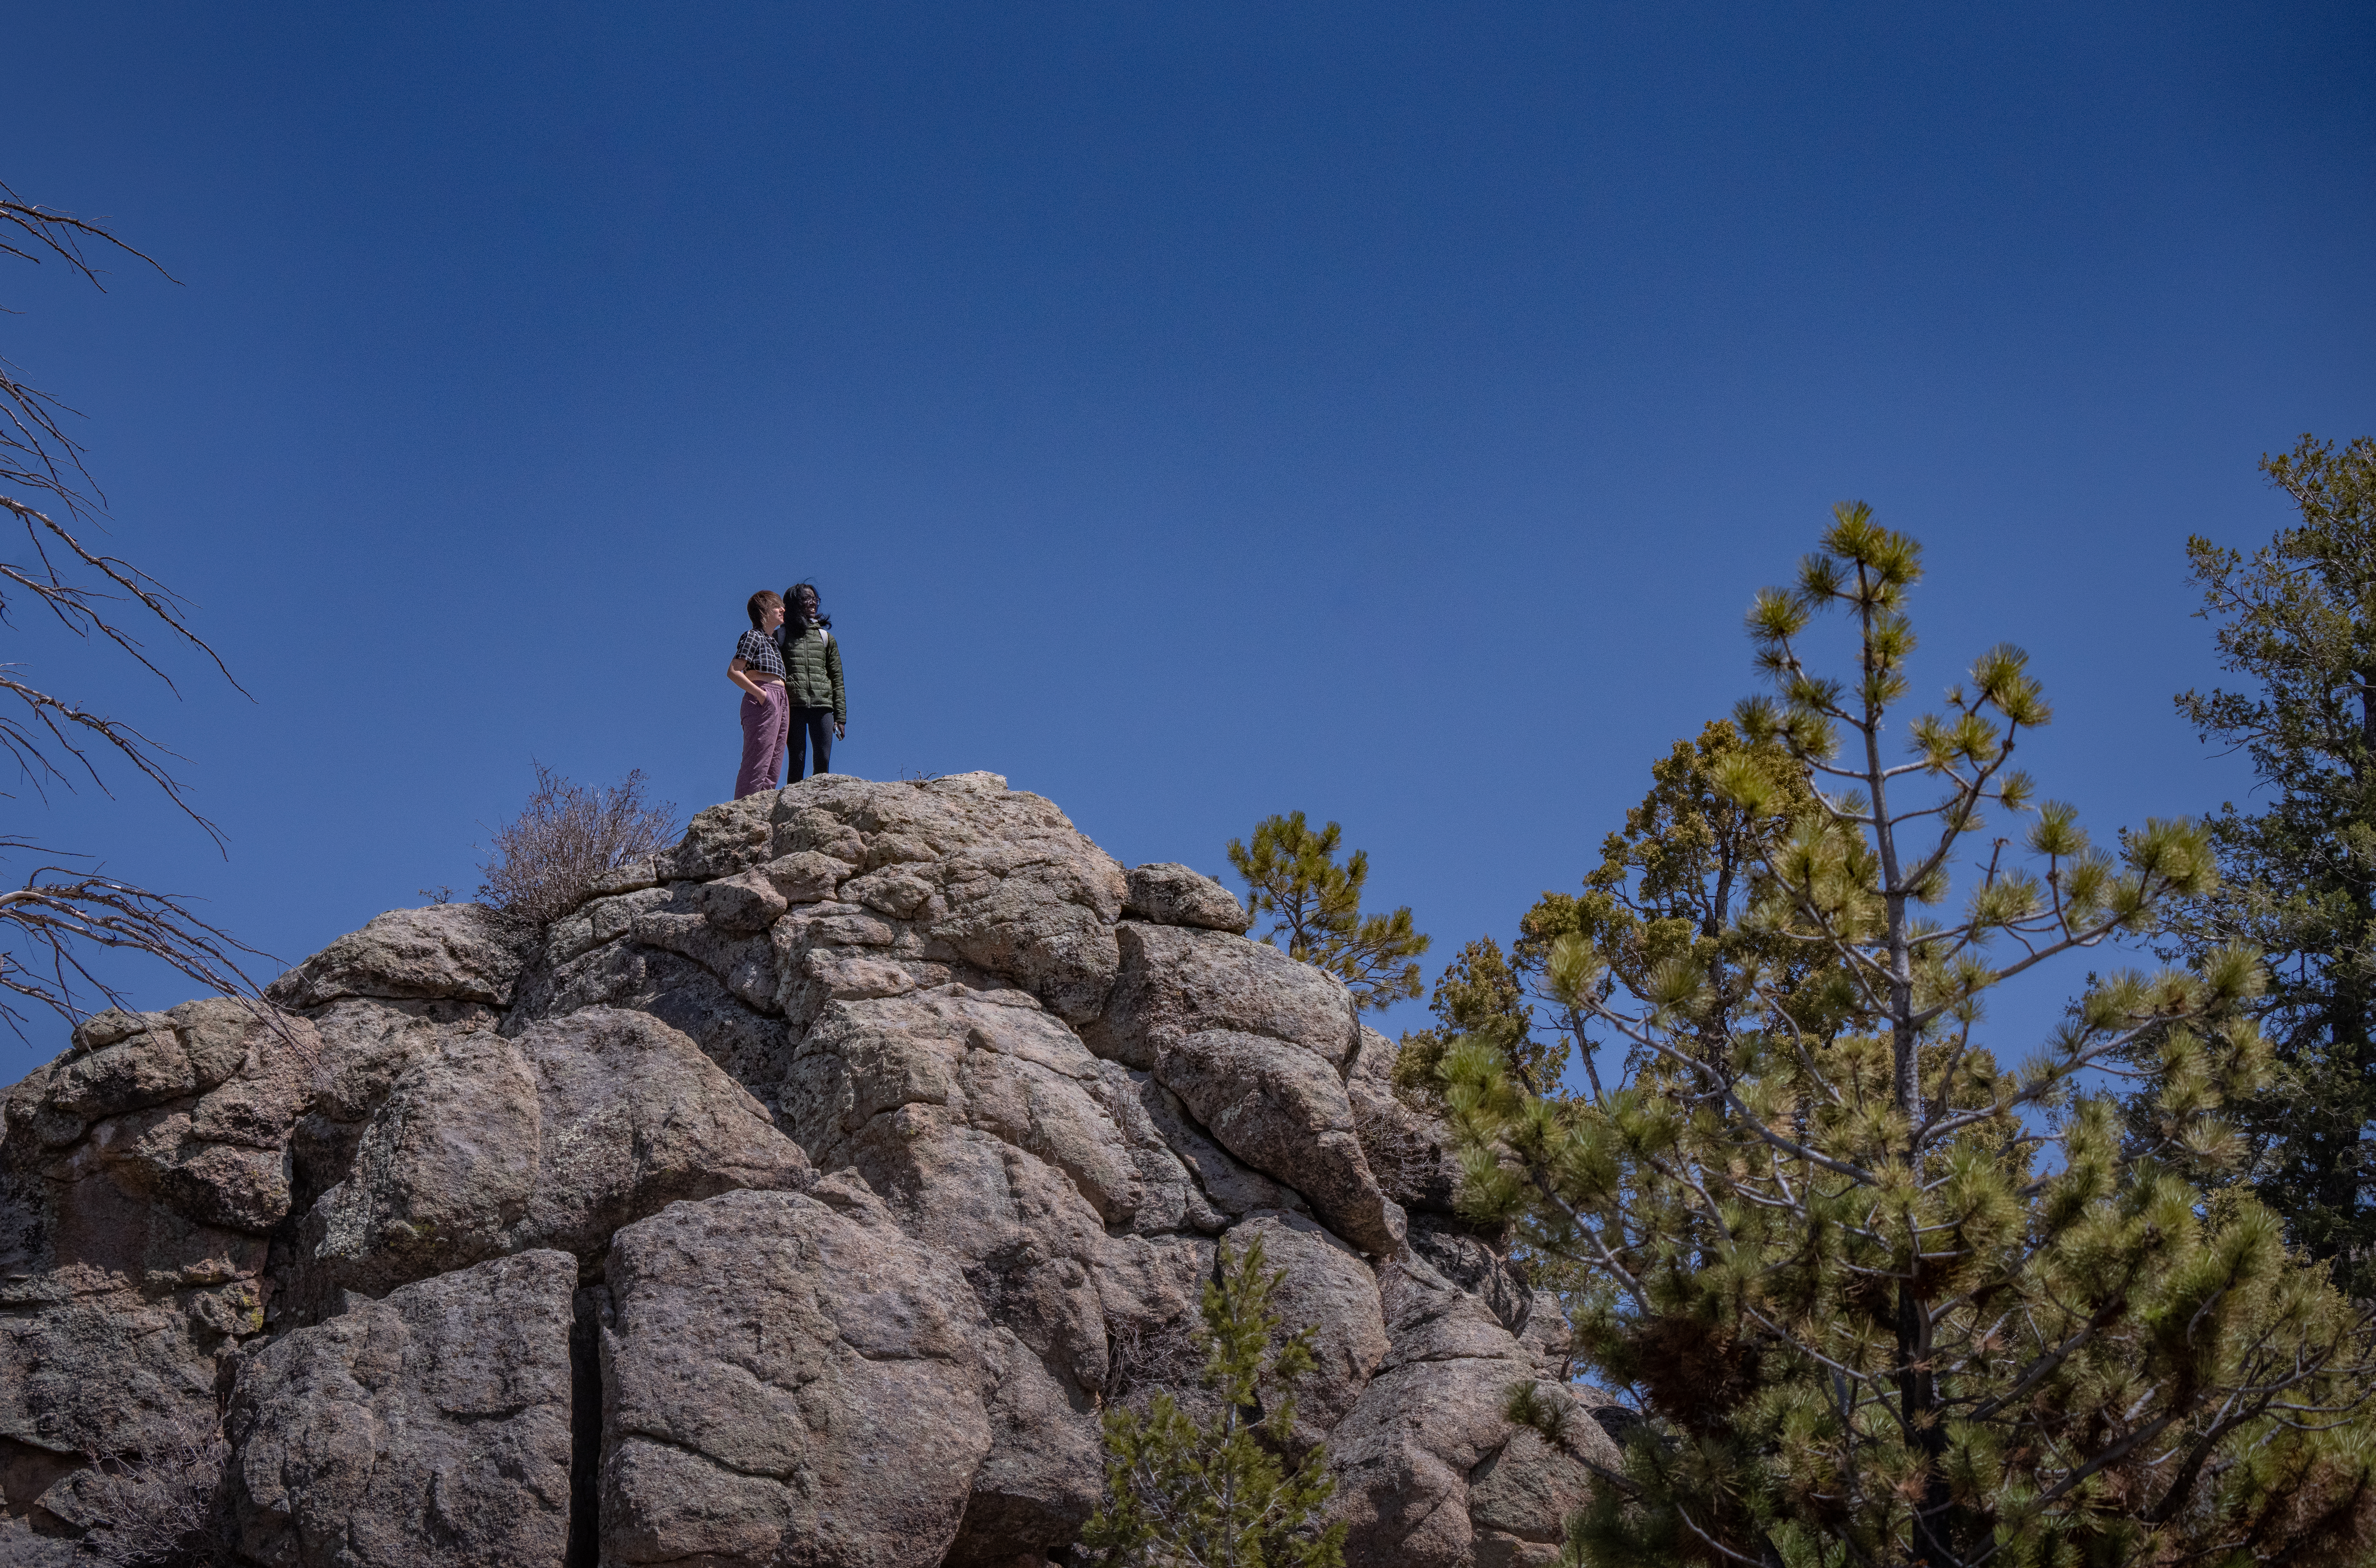 Two people are standing on a rock opposite a blue sky.